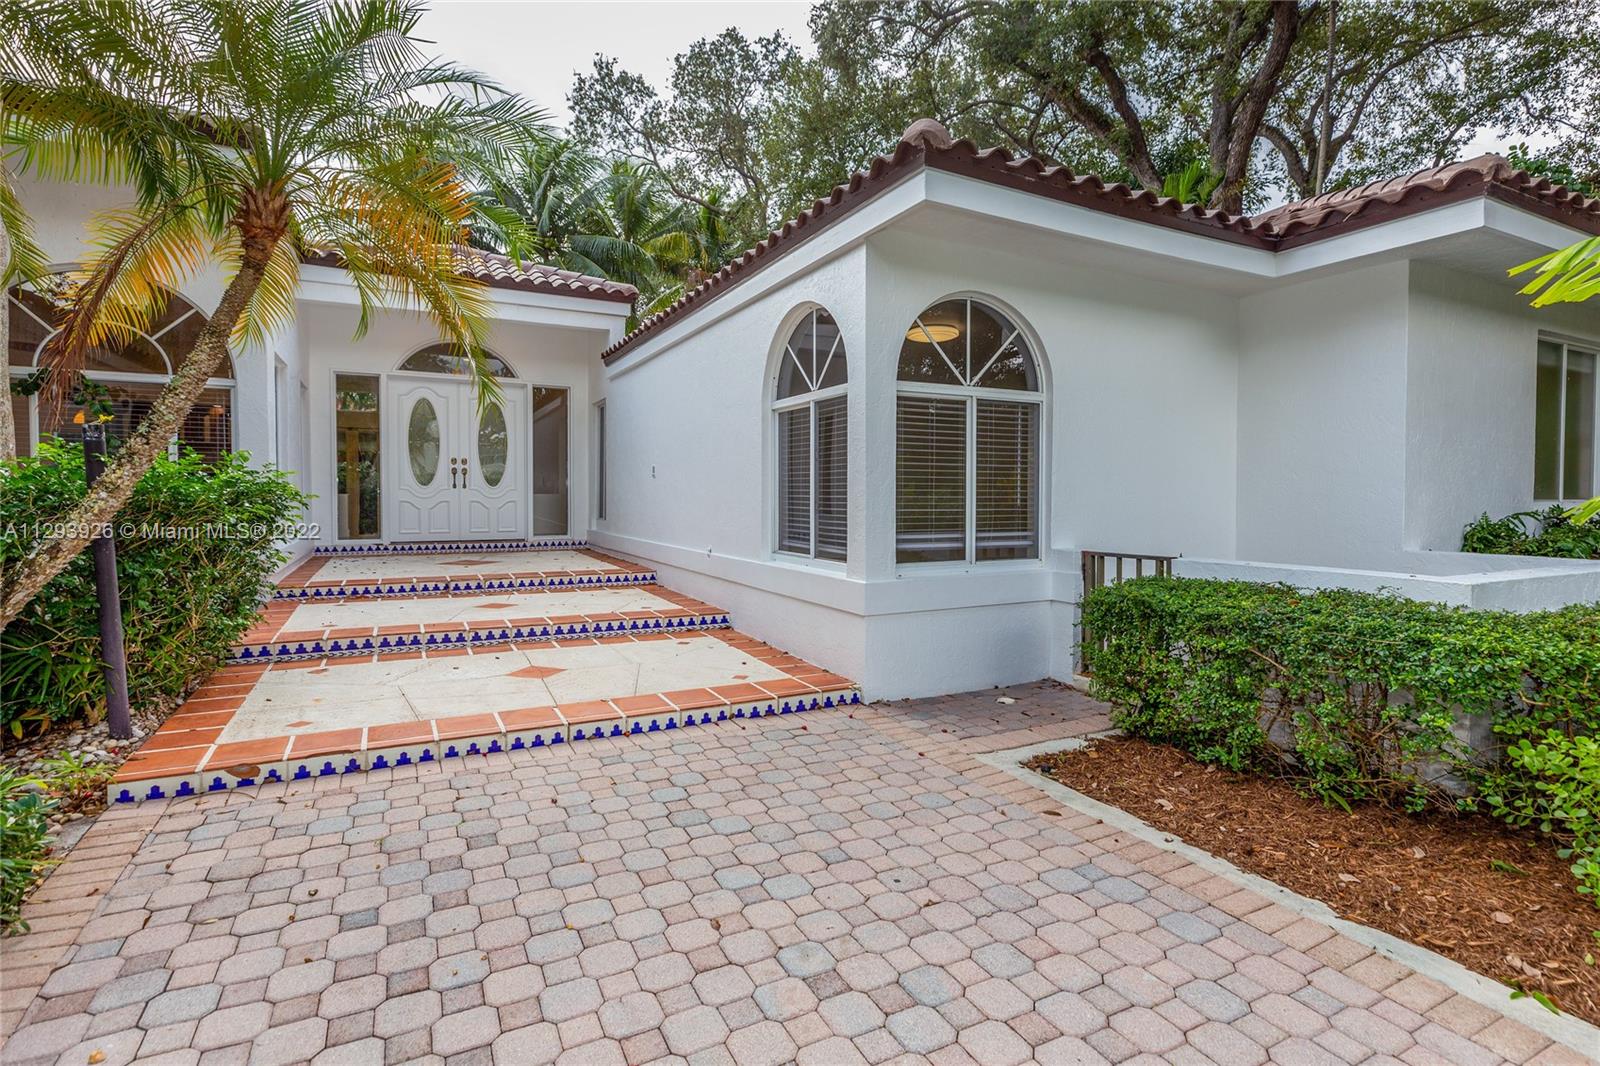 For Sale Home In South Coral Gables, On Historic Sunset Drive. Five Bedrooms, Four Bathrooms, Pool Home, Platinum Triangle Area Of South Gables Walking Distance To Cocoplum Circle.